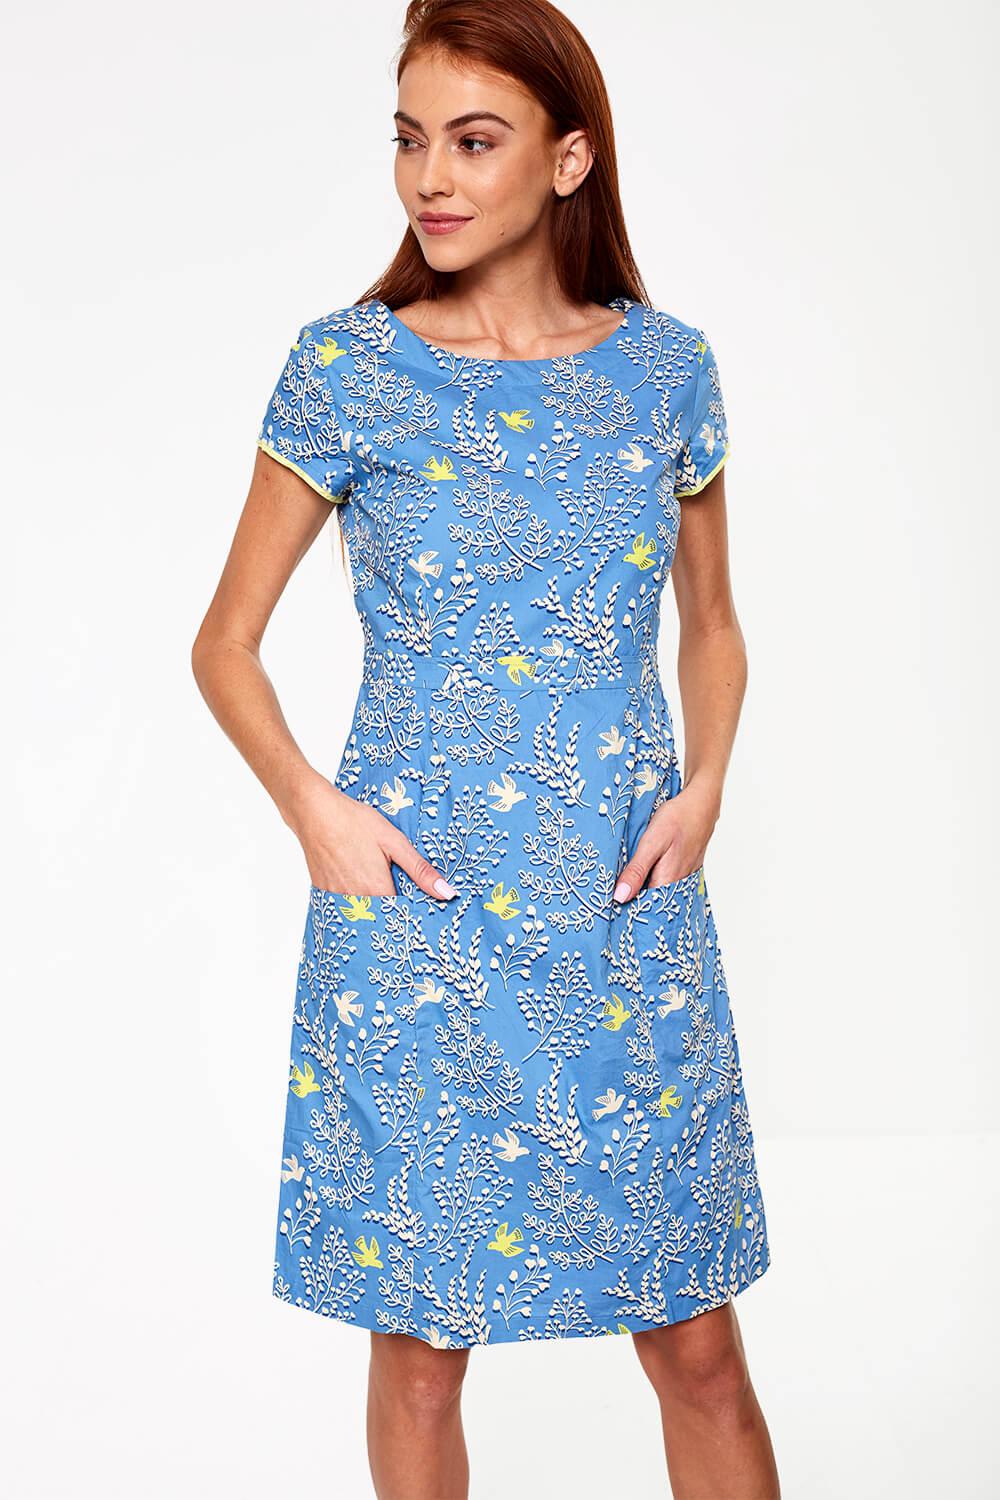 Lily & Me Harbourside Dove Print Dress in Blue | iCLOTHING - iCLOTHING